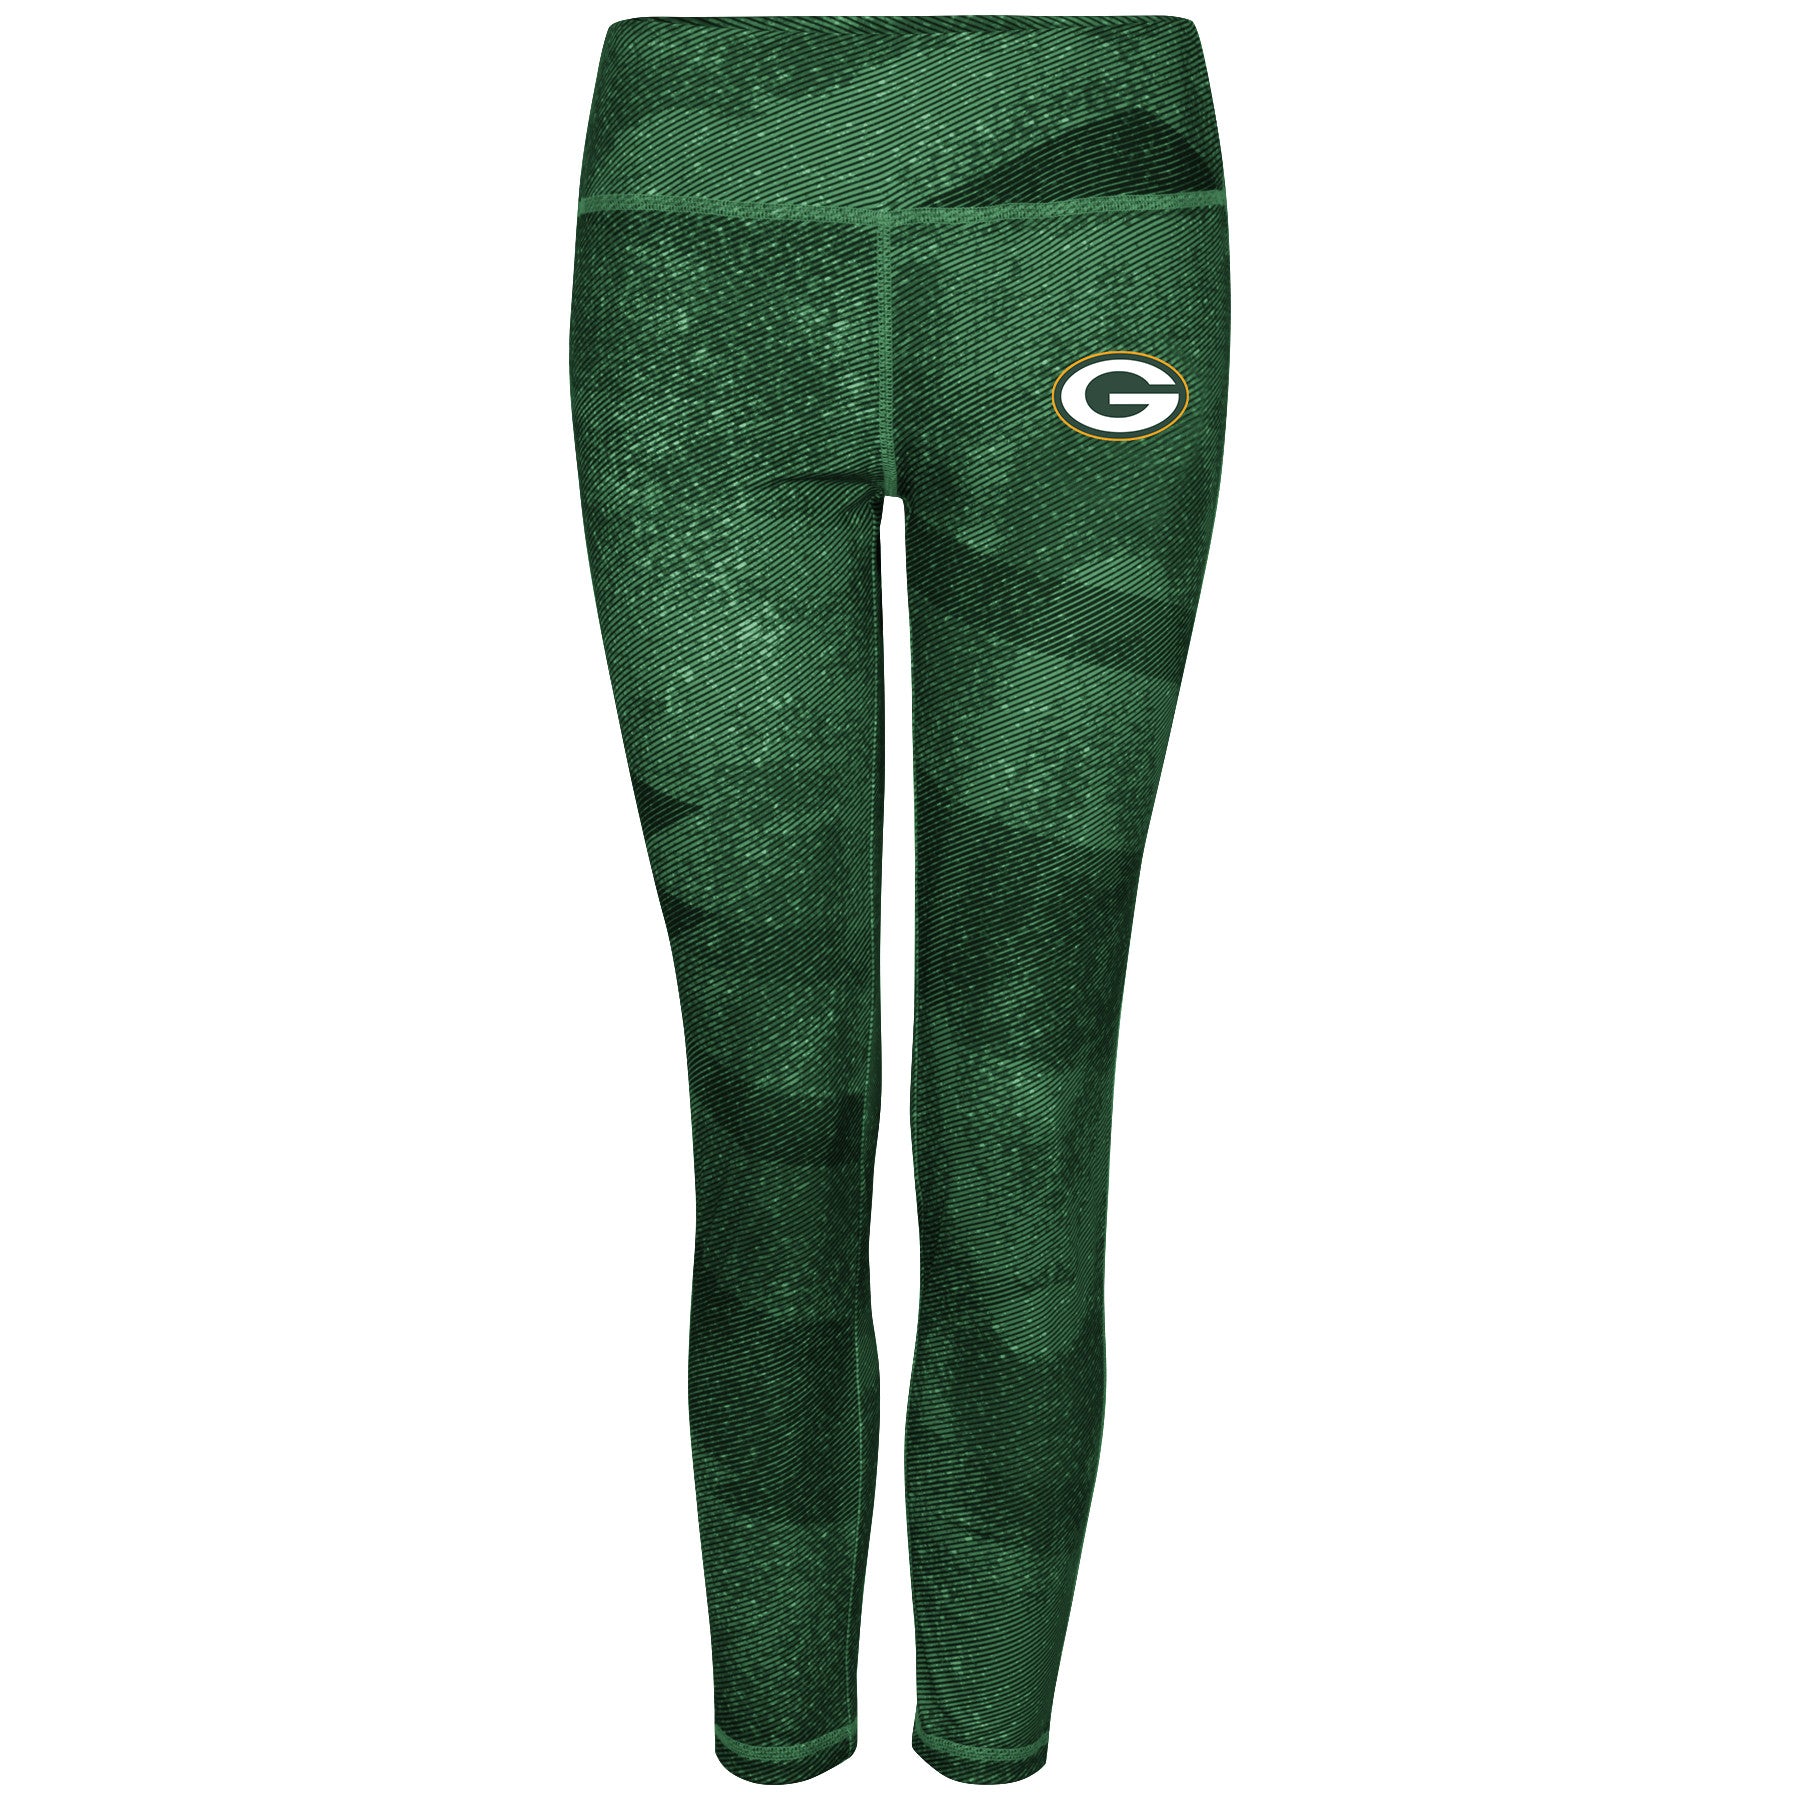 Amazing Blue Jeans Green Bay Packers Leggings – Best Funny Store